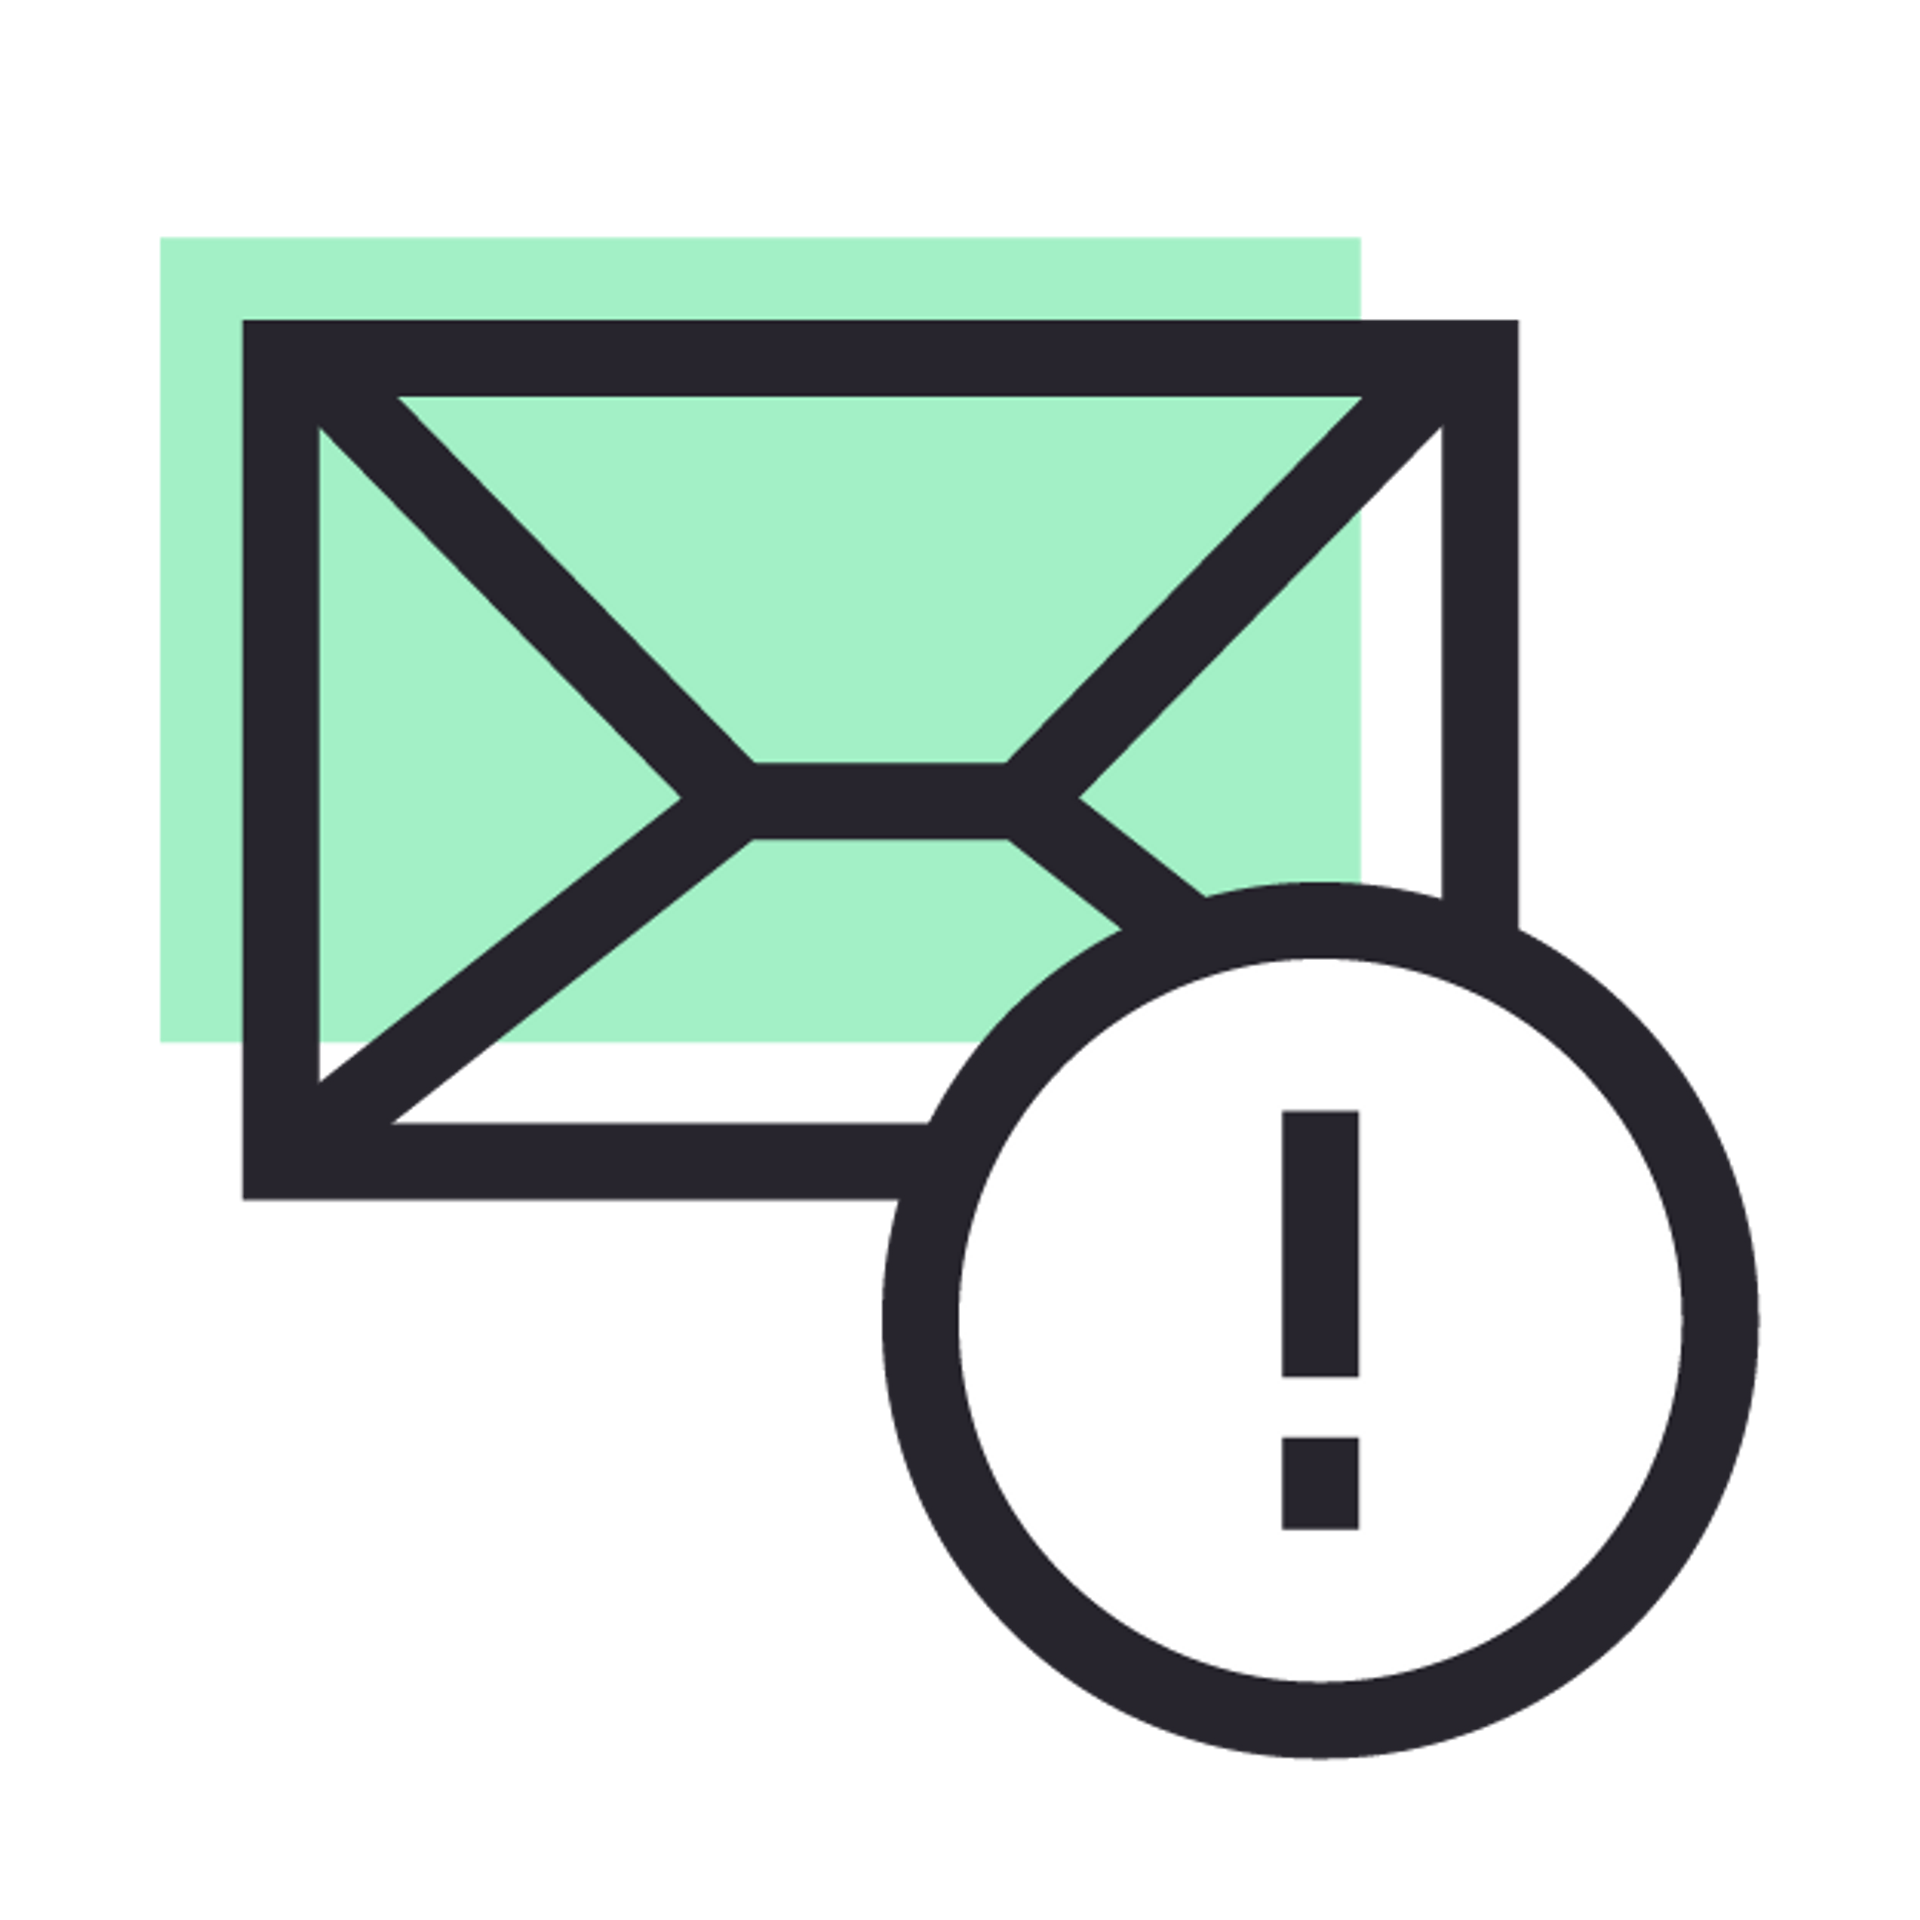 Email letter with an exclamation mark icon